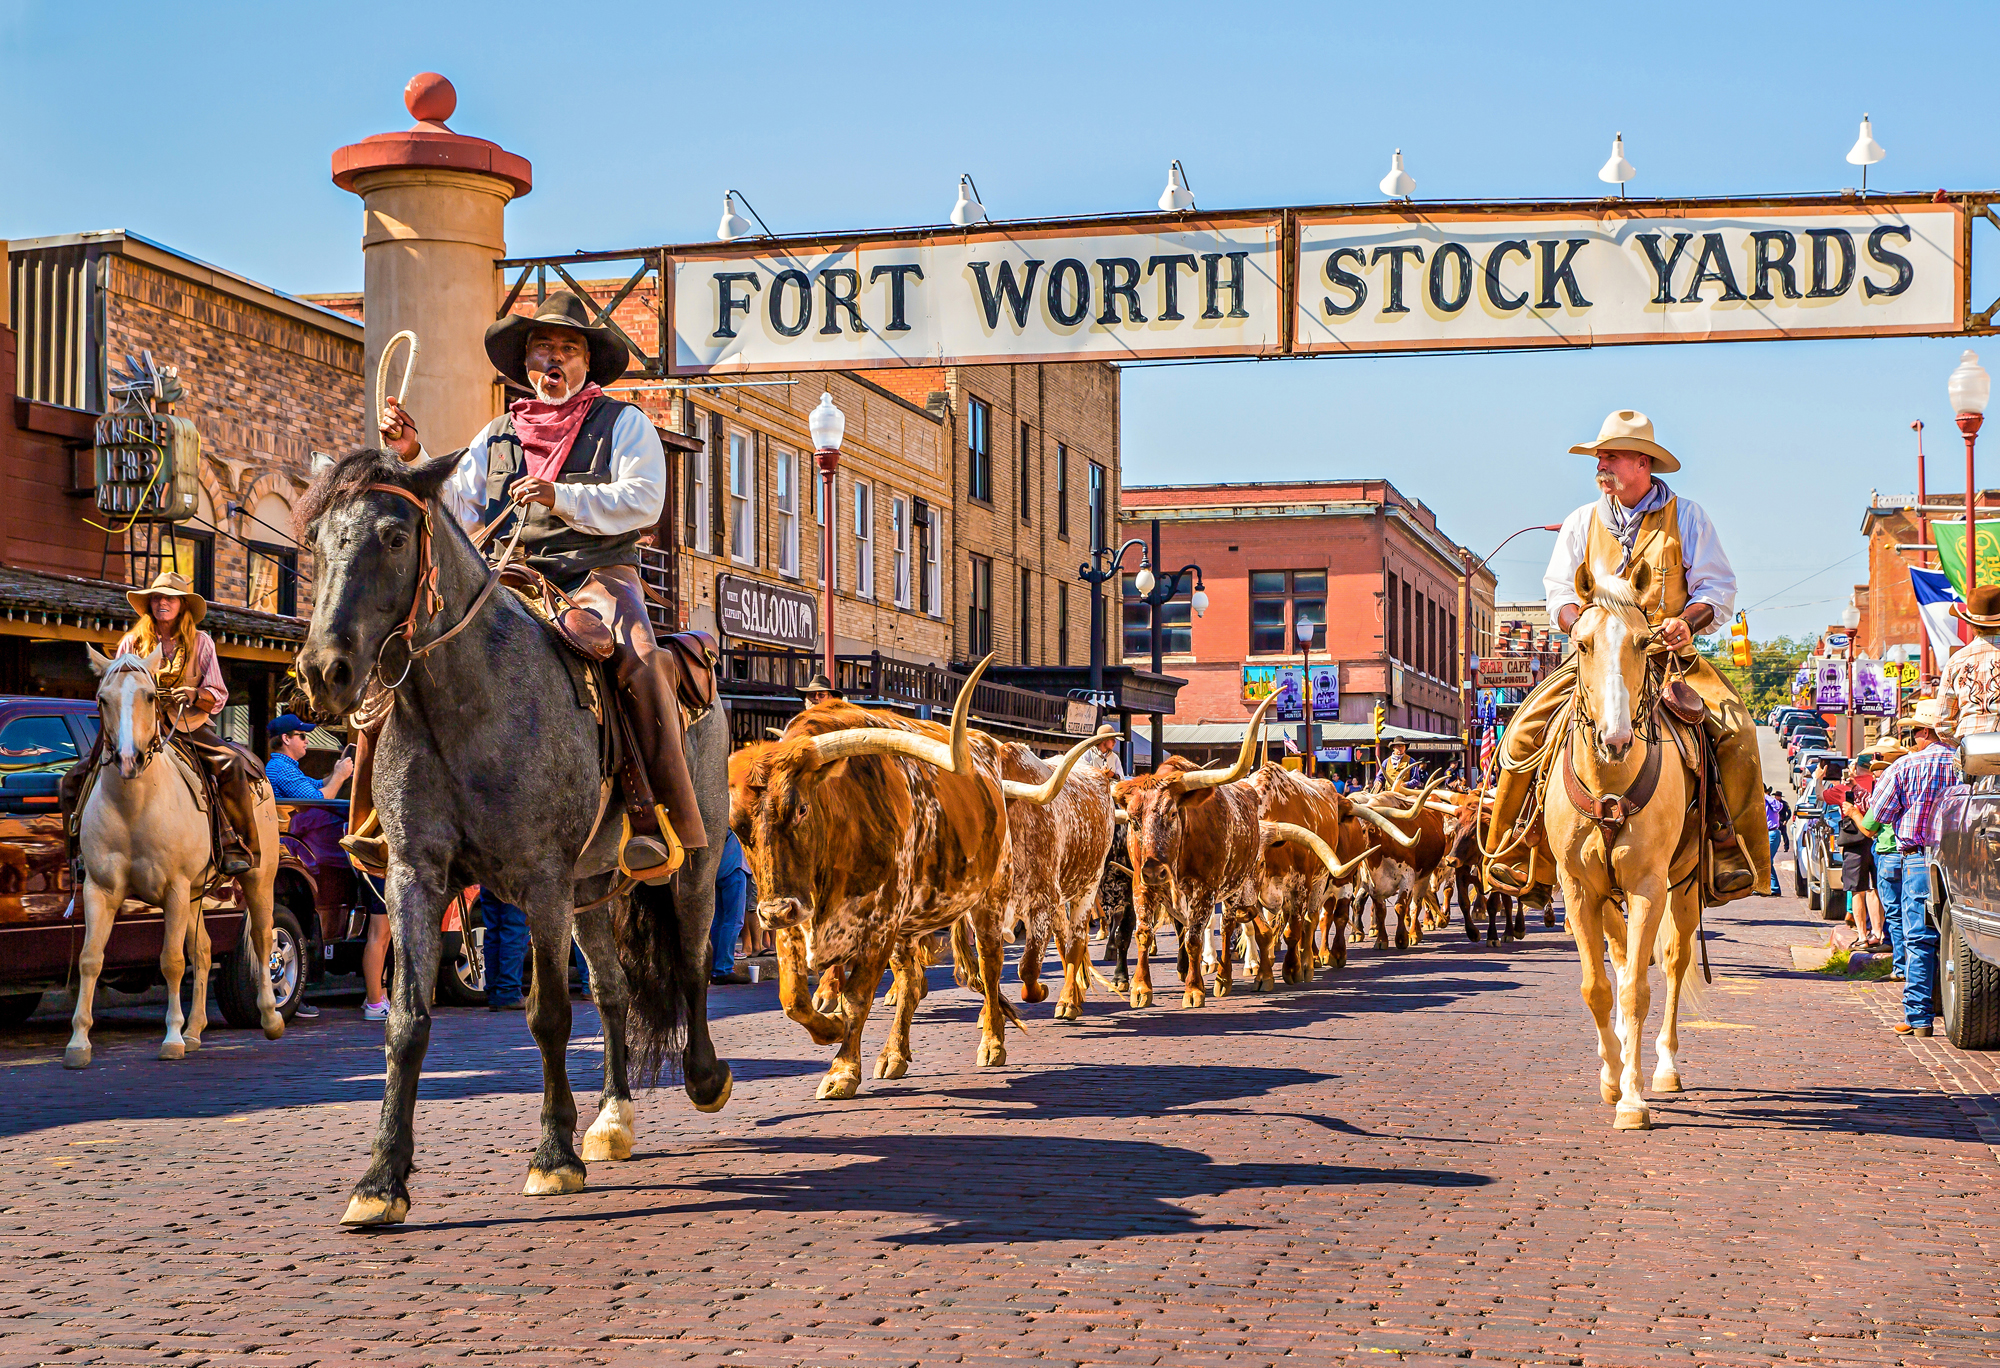 Travel Guide: A Night in the Stockyards